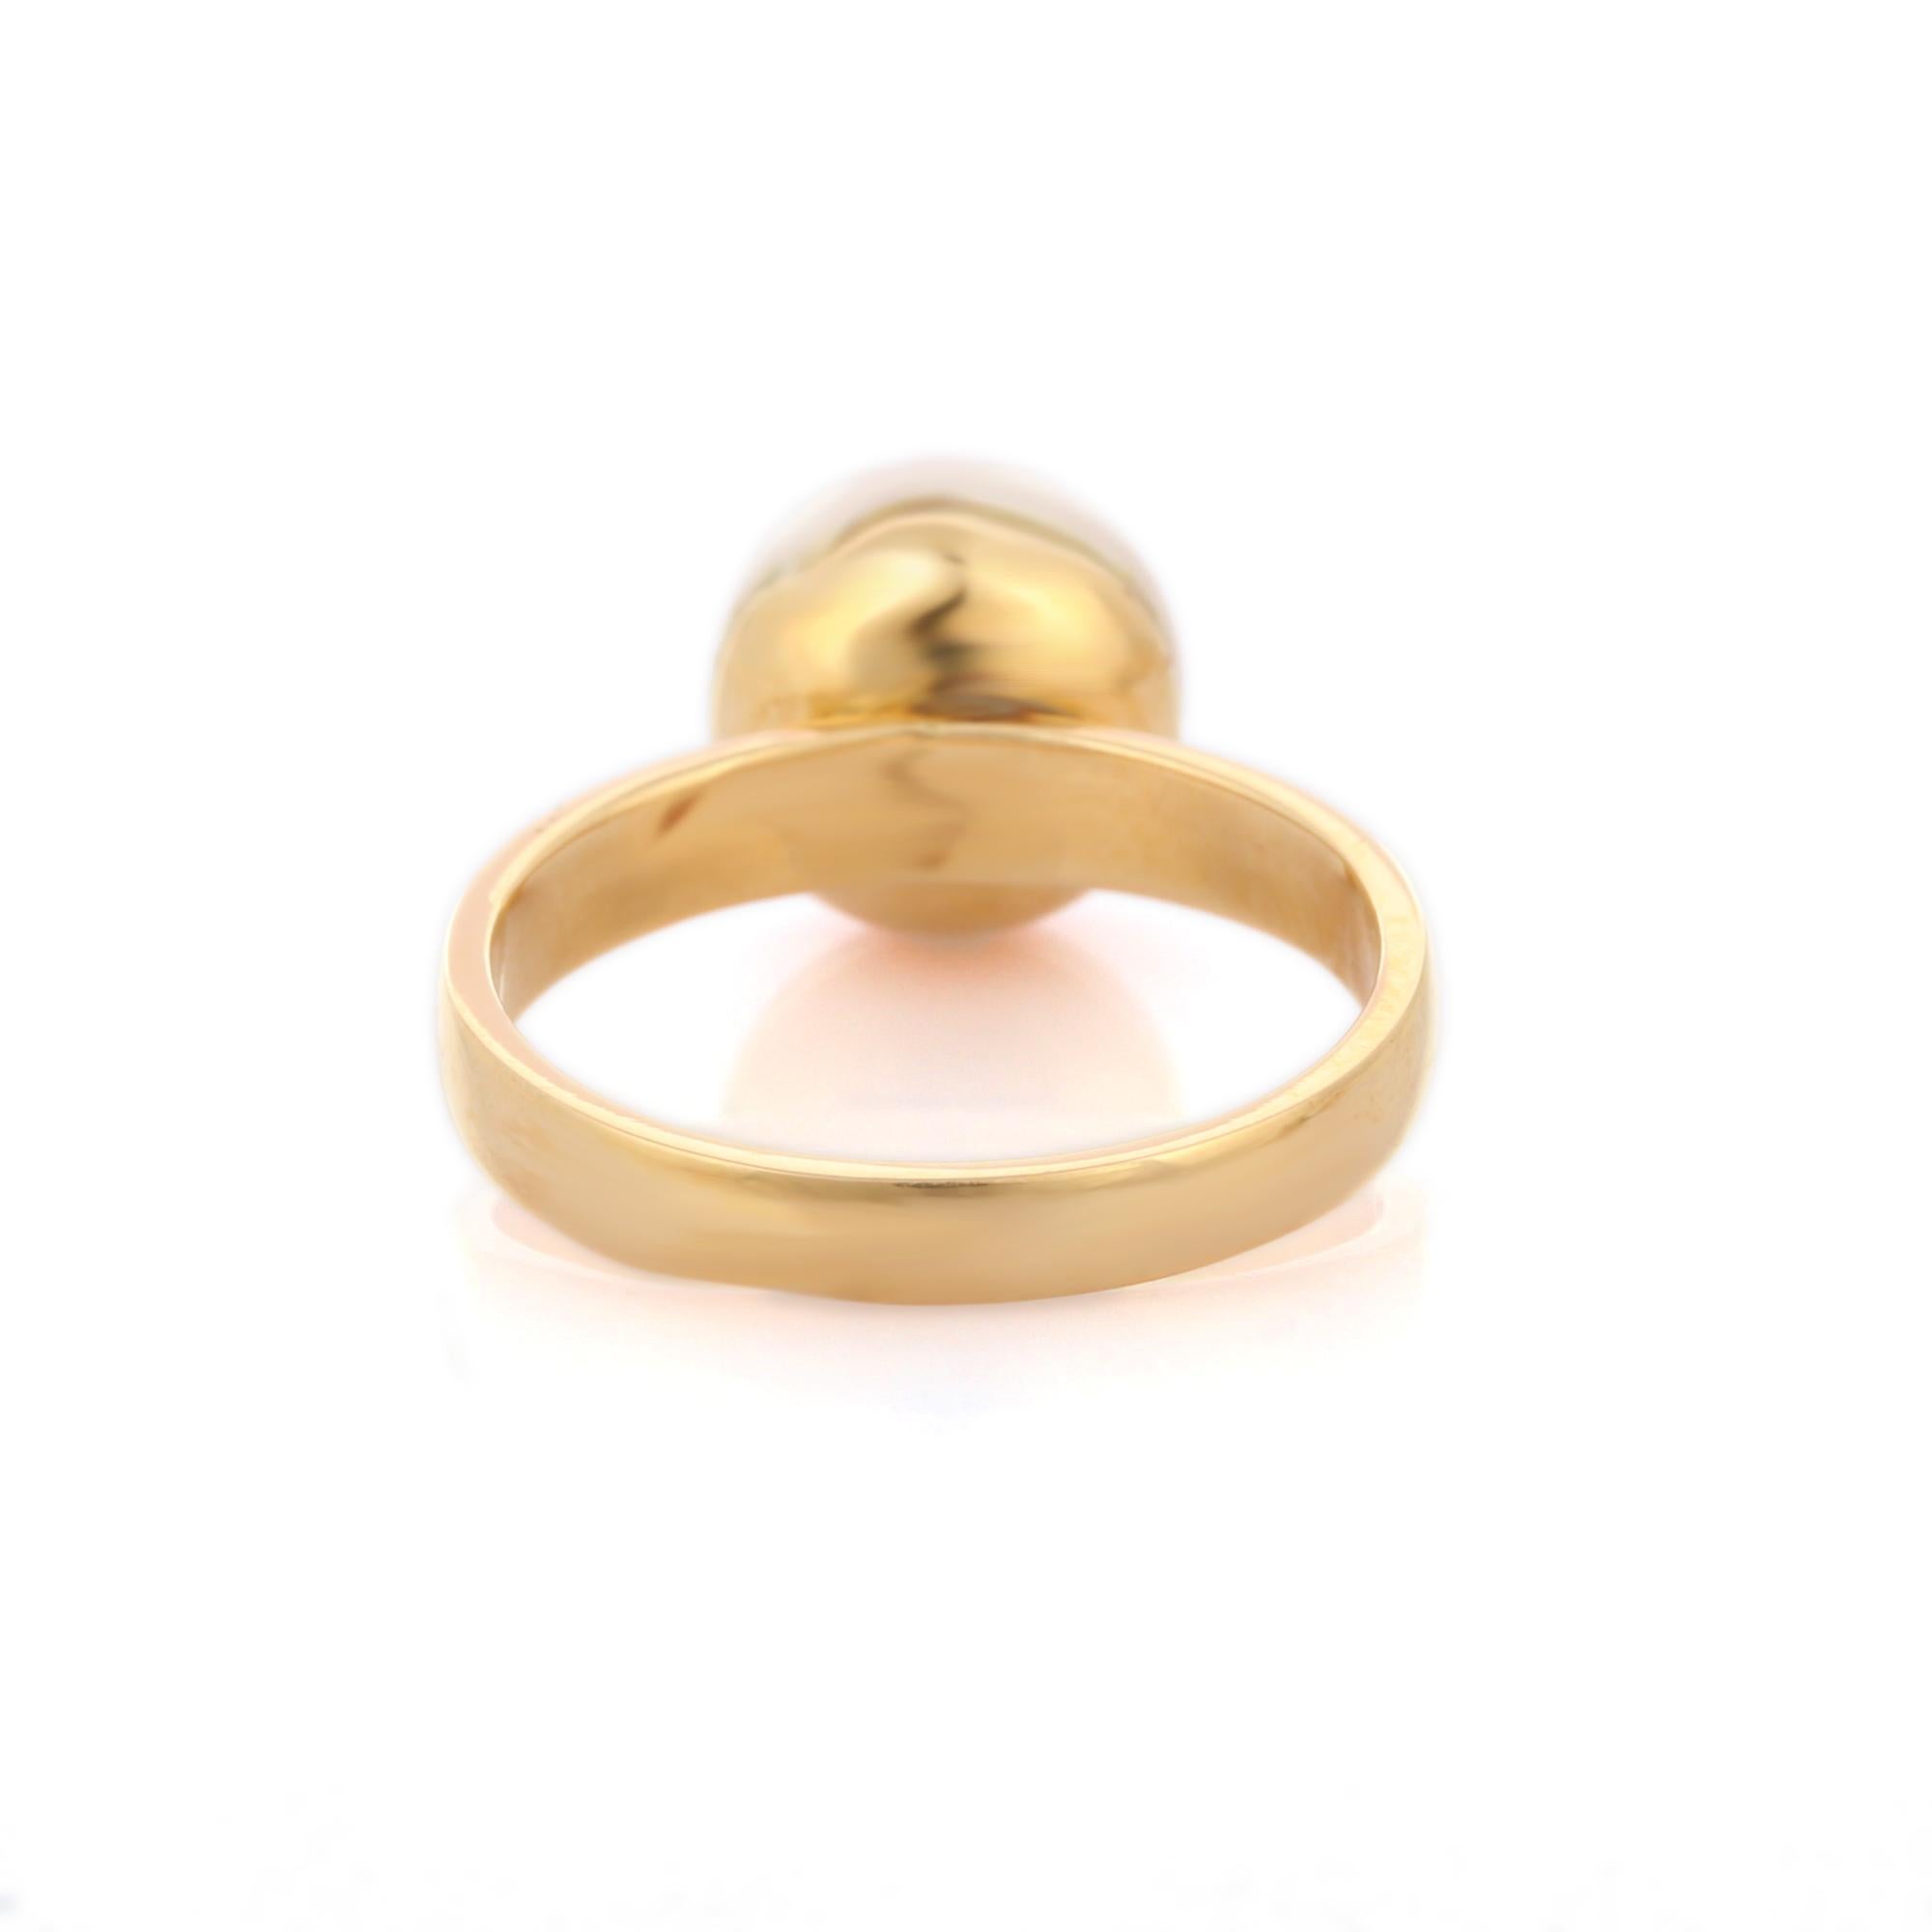 For Sale:  4.3 Carat Pearl Solitaire Ring in 18K Yellow Gold  5